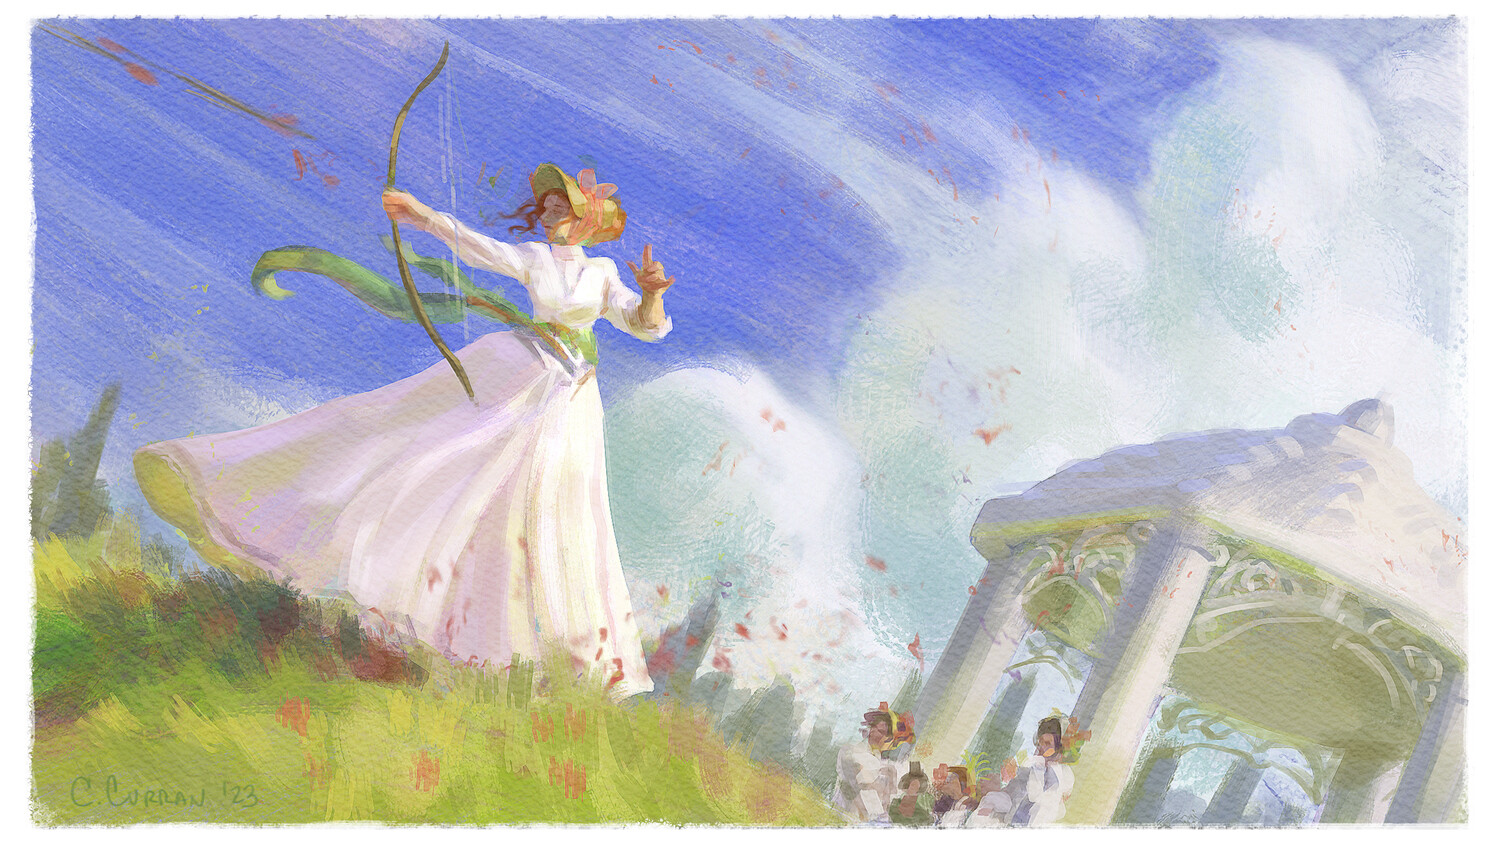 "Not one had the nymph-like ease of his wife..." May doing archery. I did a good handful of Monet studies in high key before approaching this. It was a good exercise describing form and shadow with saturation and hue instead of large range values.